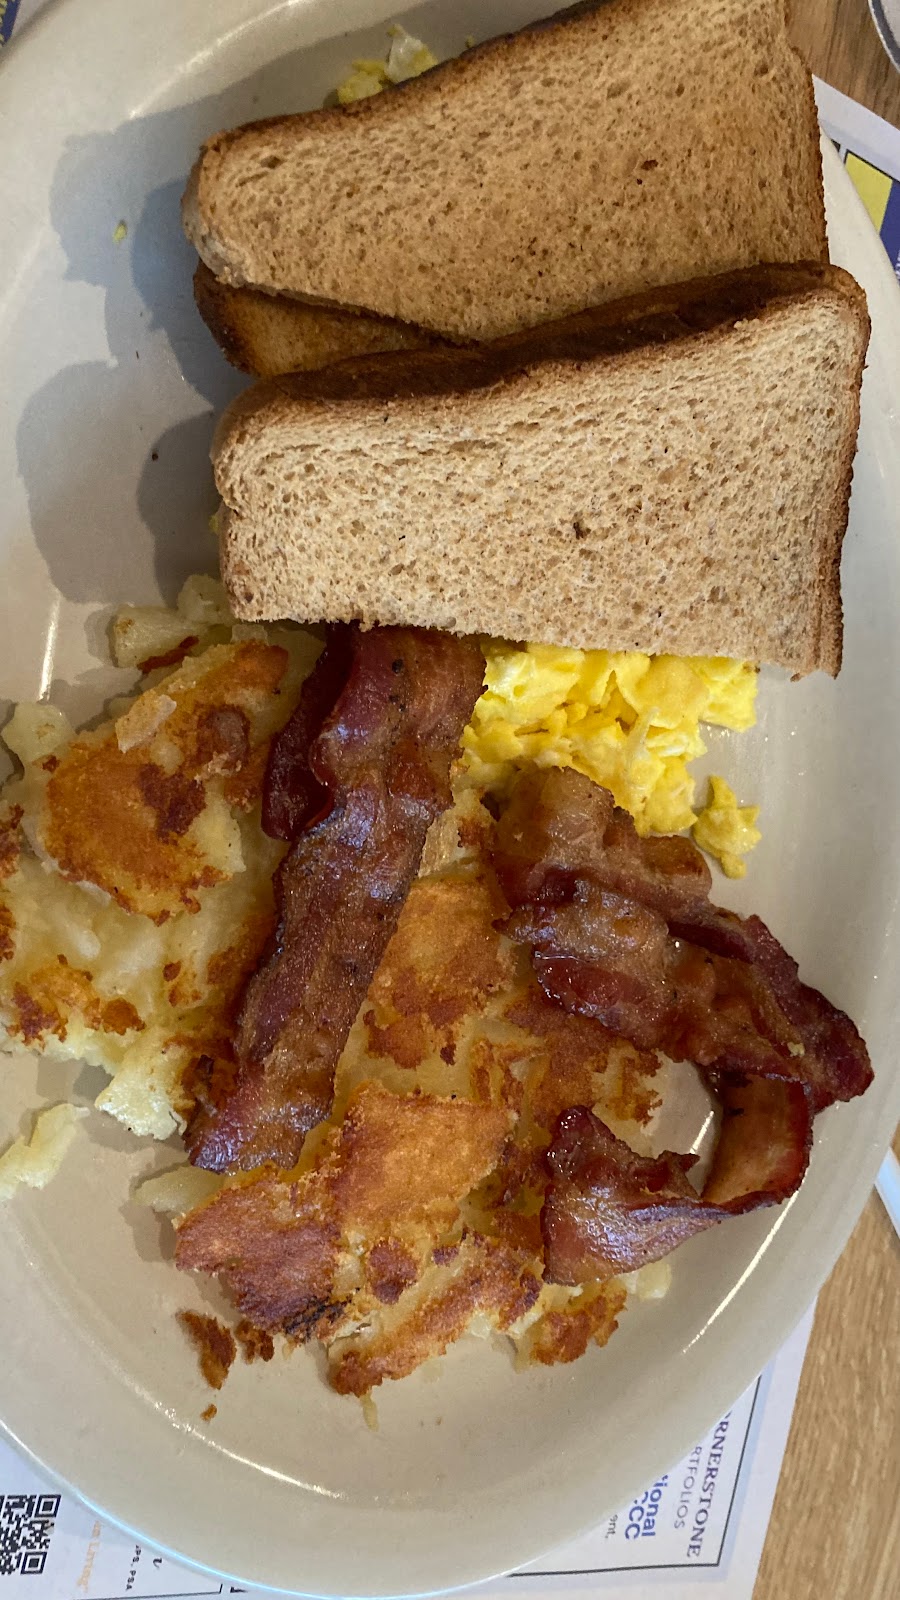 Macungie Diner | 202 E Main St, Macungie, PA 18062 | Phone: (610) 421-8333